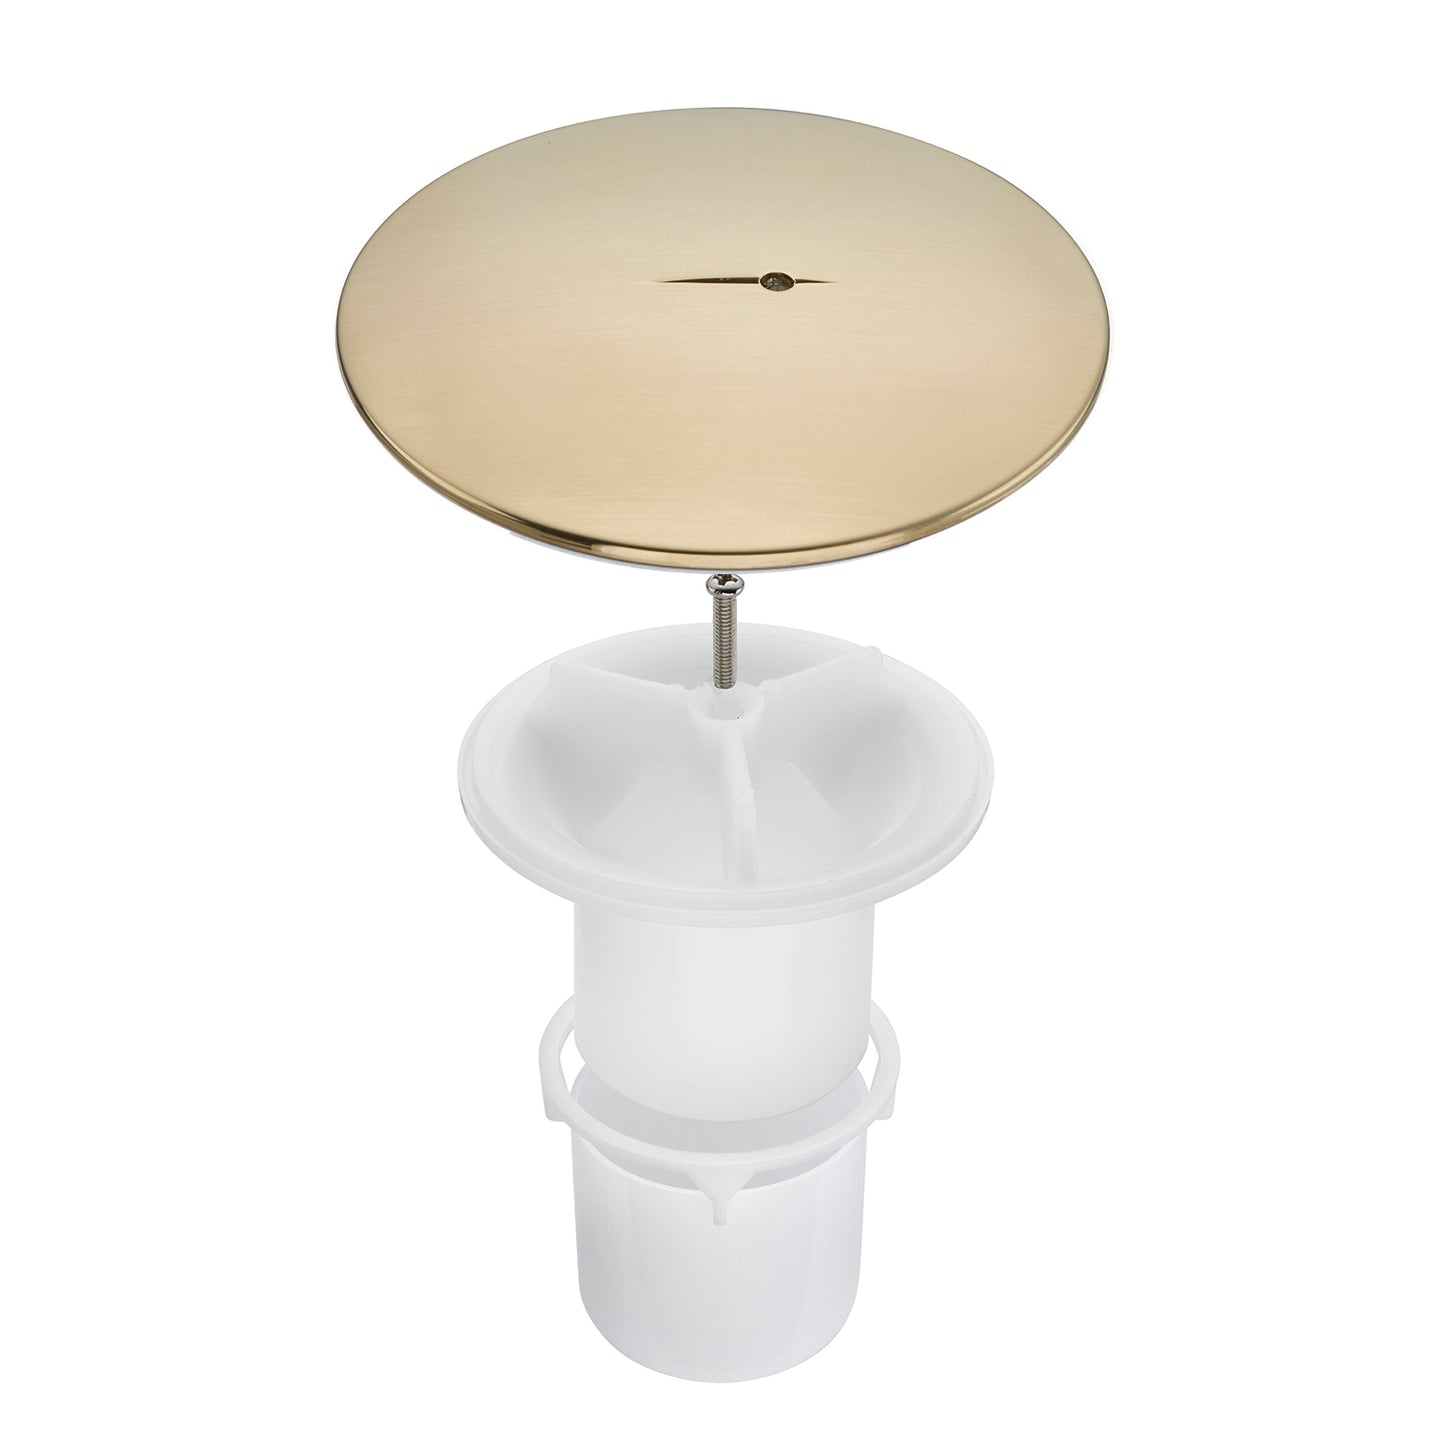 Sandy Beach Shower Replacement Shower Waste Drain Cap Cover Plug Drain Brass Gold 90mm Hole / 115mm Cover